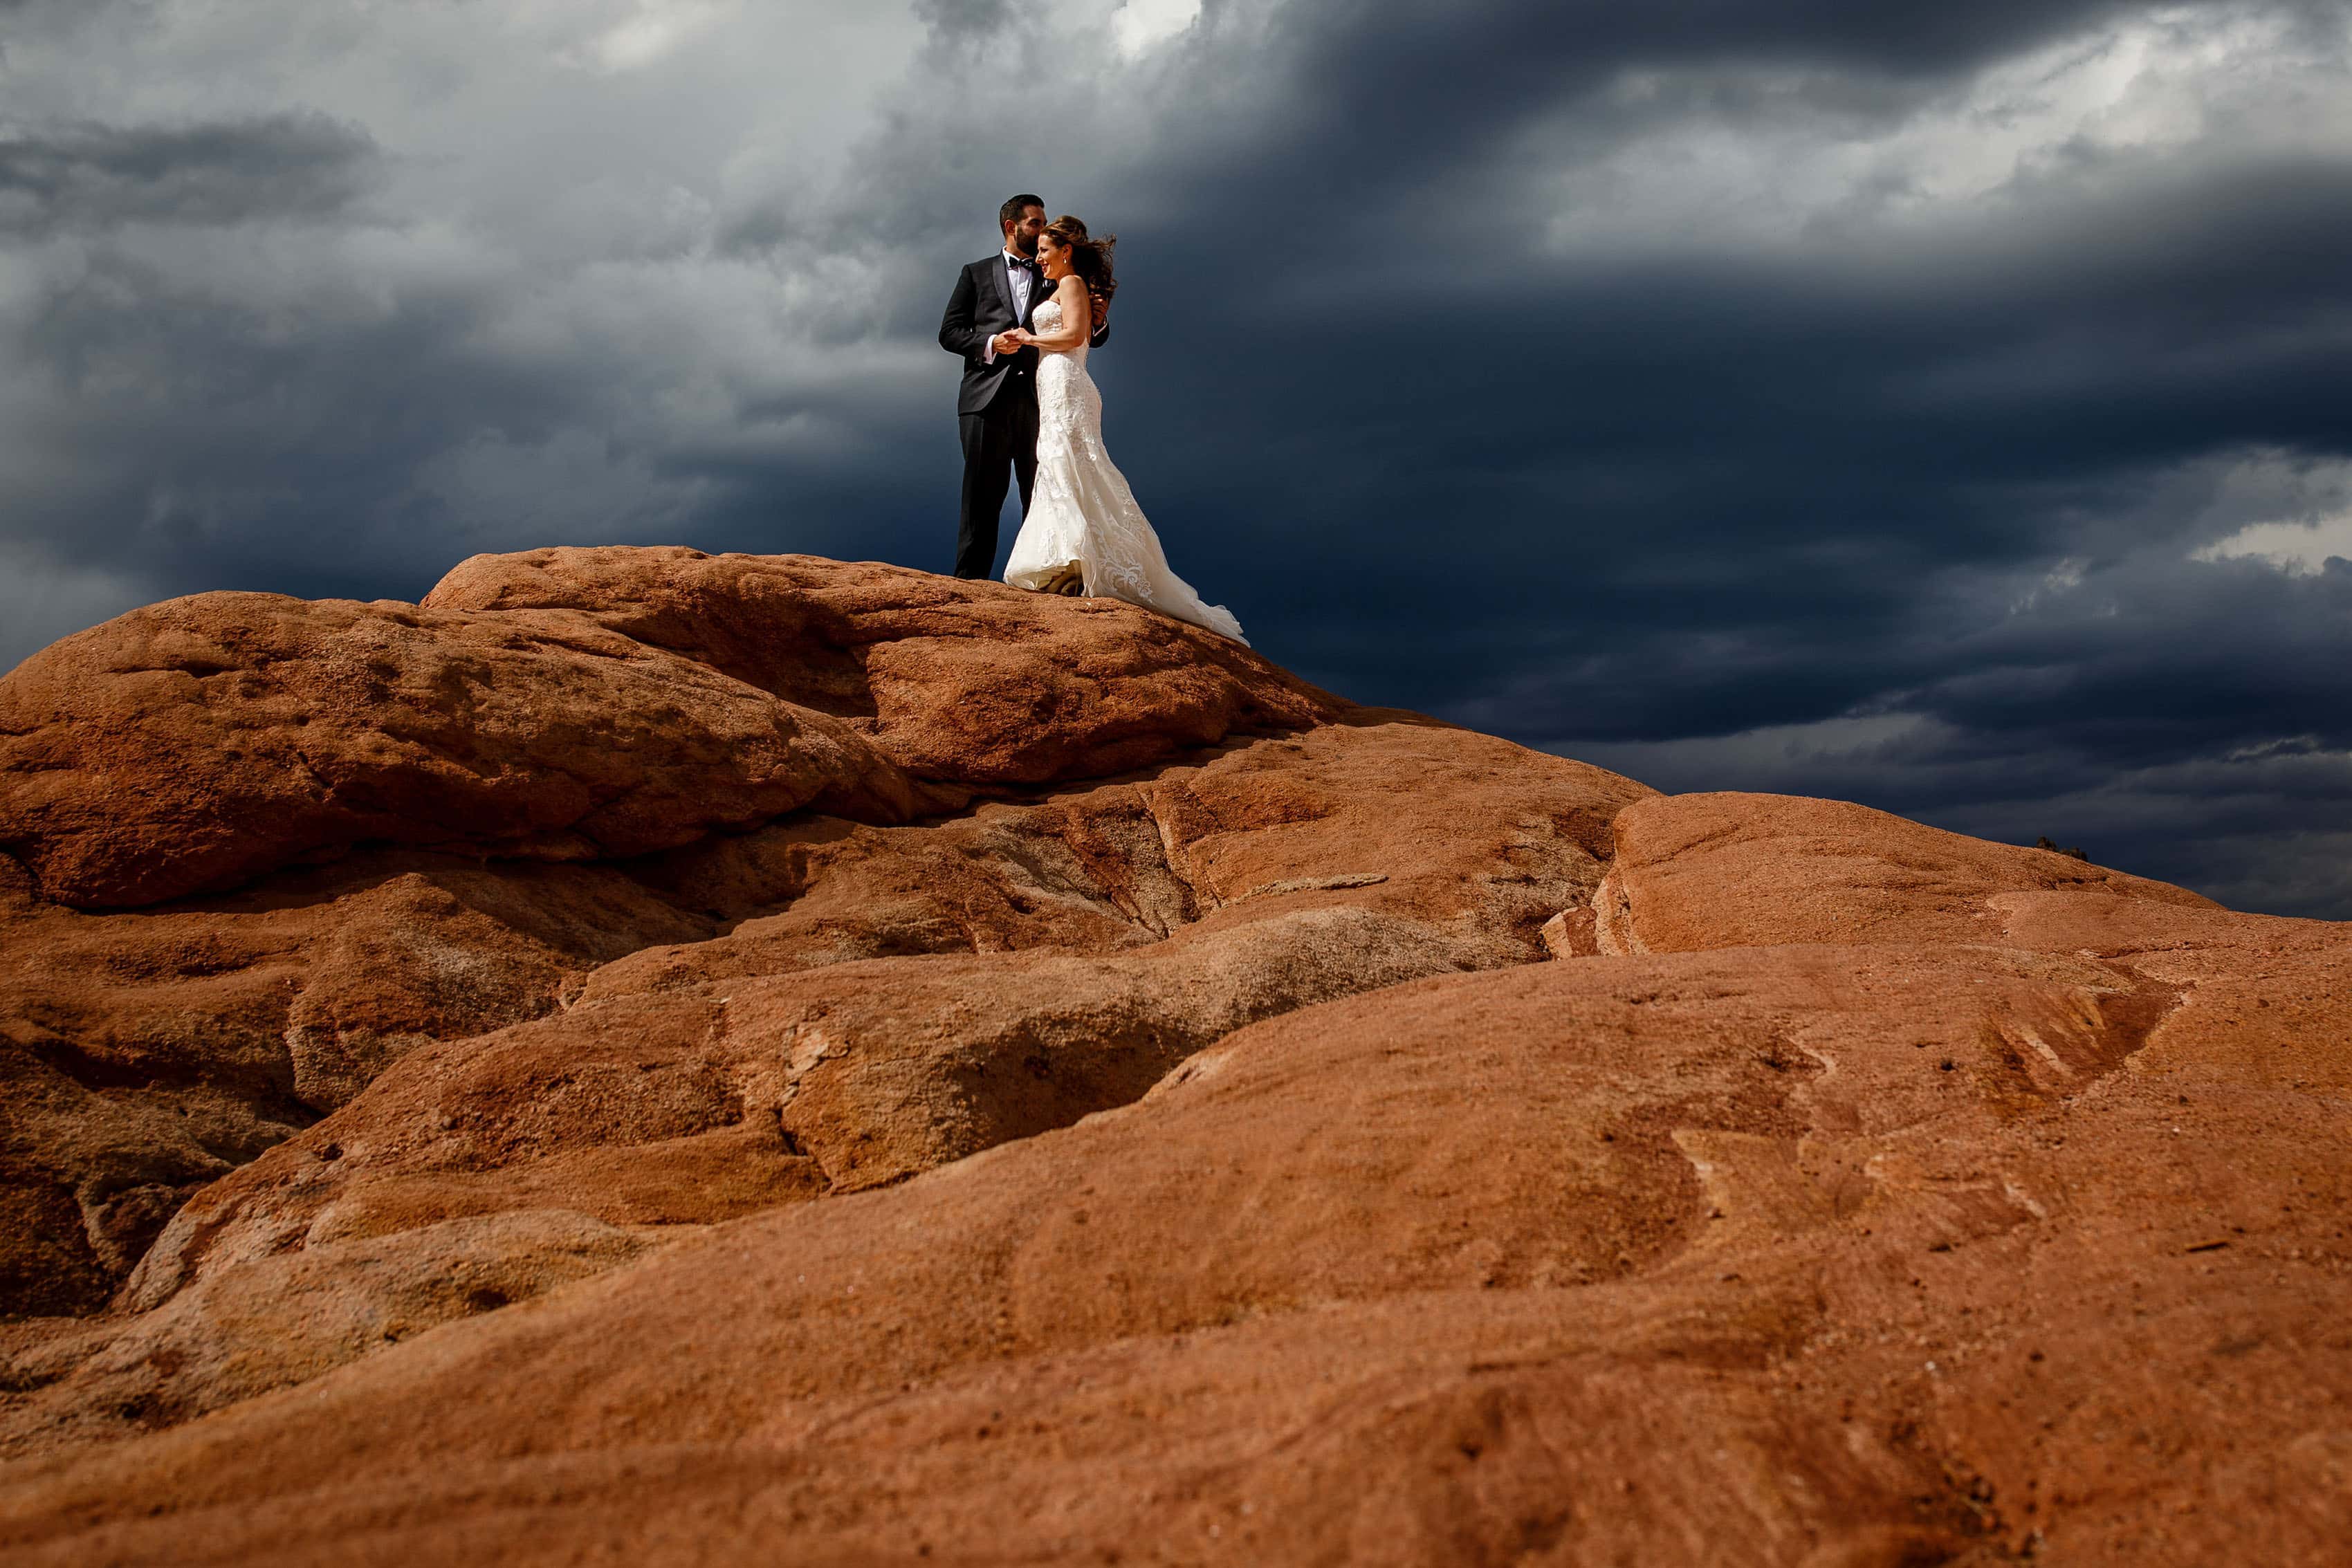 The couple share a moment on the red rocks for a portrait at Garden of the Gods park in Colorado Springs